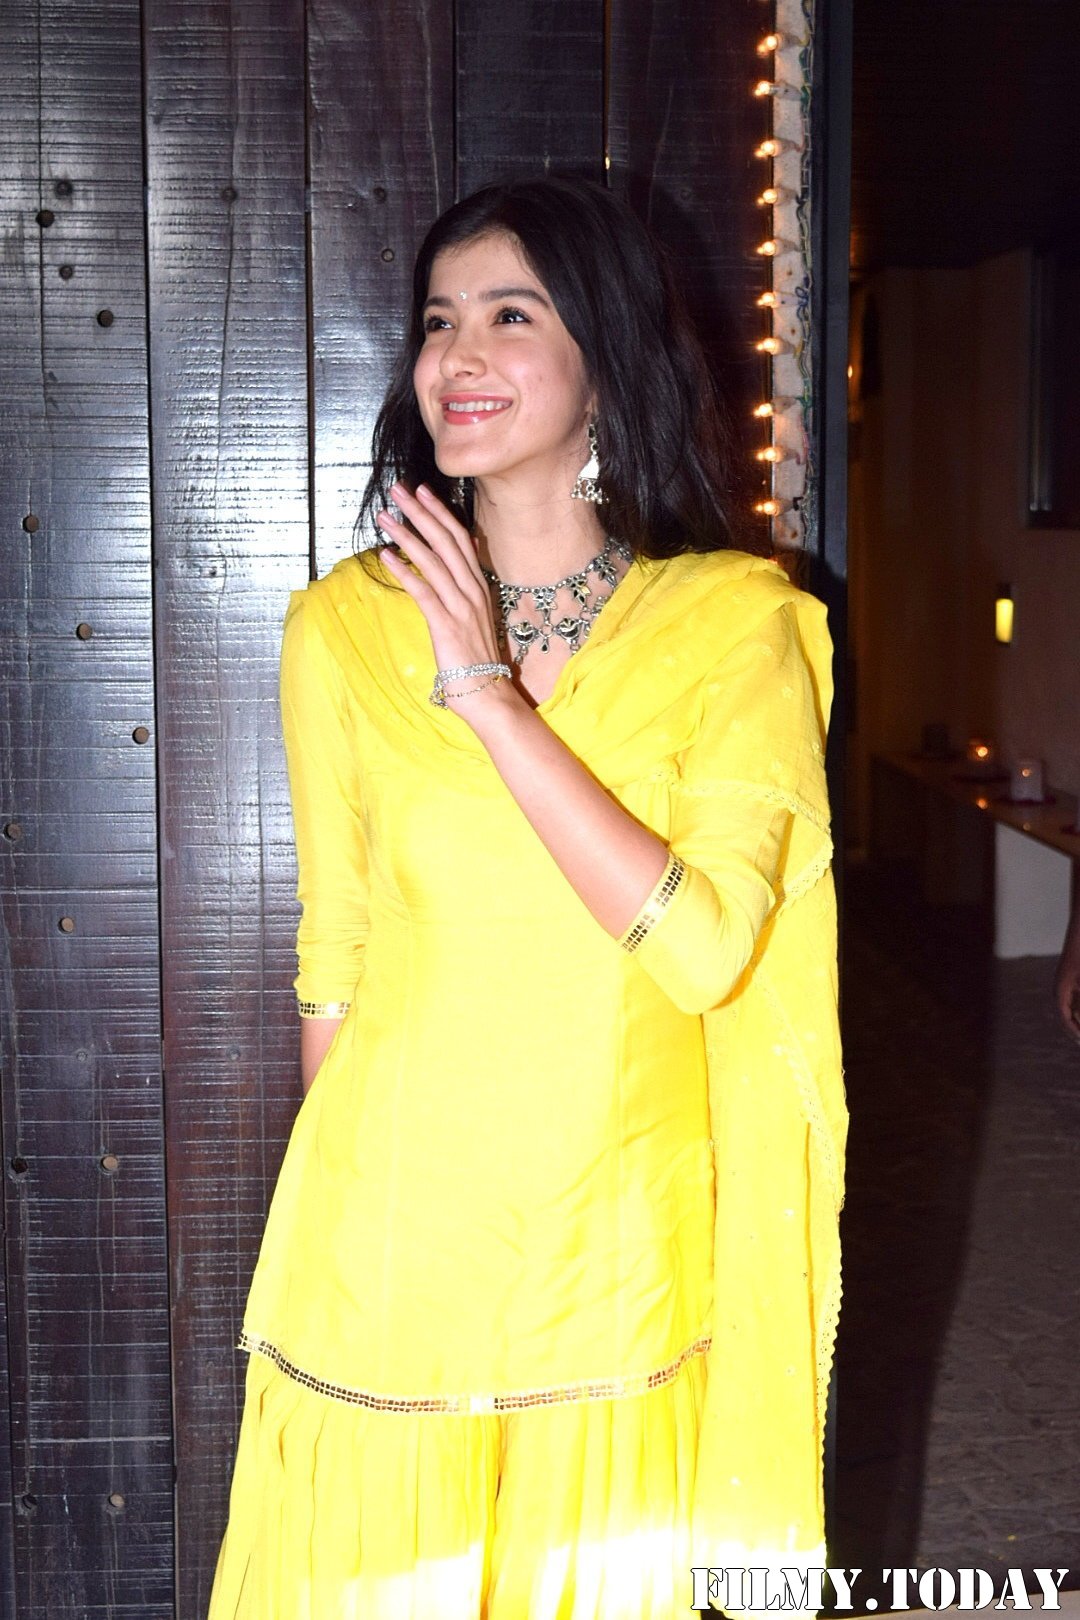 Shanaya Kapoor - Photos: Celebs At Celebration Of Karvachauth At Anil Kapoor's House | Picture 1692600